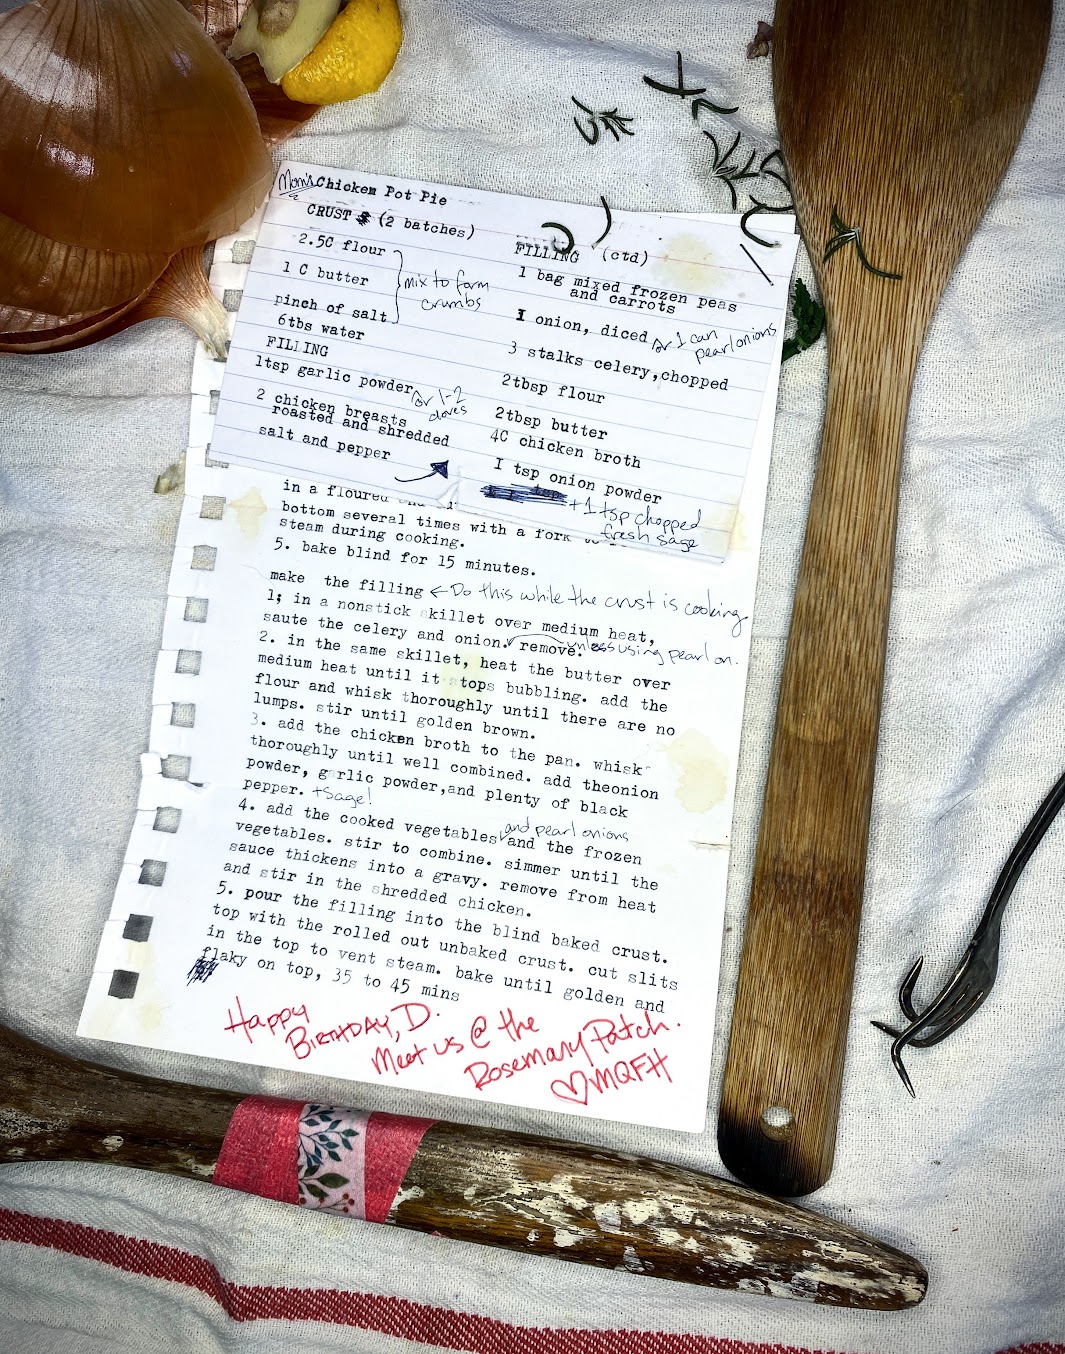 A recipe card, typewritten on an index card, stapled to a torn sheet of notebook paper with a typewritten recipe on it. Both are weathered, torn, stained, and annotated. The card is on top of a stained white kitchen towel, next to a couple of burned and repaired wooden cooking spoons, some onion and lemon scraps, a scattering of rosemary, and a bent fork. Visible recipe text is as follows (all is typewritten unless otherwise indicated; see story text for recipe in full):Index card: Chicken Pot Pie (handwritten annotation reading “Mom’s”)Crust (2 batches)2½ cups flour    Pinch of salt    1 cup butter (handwritten annotation indicates these three ingredients should be mixed to form crumbs)6 tablespoons waterFilling1 teaspoon garlic powder – handwritten annotation reading “or 1-2 cloves”2 chicken breasts roasted and shreddedSalt and pepper – hand-drawn arrow points up to the next column Filling continued1 bag mixed frozen peas and carrots1 onion, diced; handwritten annotation reading “or 1 can pearl onions”3 stalks celery, chopped2 tablespoons flour2 tablespoons butter4 cups chicken broth1 teaspoon onion powder(Several typing errors are scribbled out; handwritten annotation reading “1 tsp chopped fresh sage”)The index card overlaps the recipe page. The recipe visible on the page is as follows:5.	Bake blind for 15 minutes.  Make the Filling (handwritten annotation indicates to do this while the crust is cooking.)1.	In a nonstick skillet over medium heat, sauté the celery and onion. Handwritten note says “unless using pearl on.” Remove.2.	In the same skillet, heat the butter over medium heat until it stops bubbling. Add the flour and whisk thoroughly until there are no lumps. Stir until golden brown.3.	Add the chicken broth to the pan. Whisk thoroughly until well-combined. Add the onion powder, garlic powder, and plenty of black pepper. (Handwritten annotation reads “+ sage!”)4.	Add the cooked vegetables (handwritten annotation reads “^or 1 can pearl onions”) and the frozen vegetables. Stir to combine. Simmer until the sauce thickens into a gravy. Remove from the heat and stir in the shredded chicken. 7.	Pour the filling into the blind-baked crust. Top with the rolled-out unbaked crust. Cut slits in the top to vent steam. Bake until golden and flaky on top, 35–45 minutes. Below the recipe, a typing error is scribbled out. A handwritten note in different handwriting from the recipe annotations, in red marker, reads: “Happy birthday, D. Meet us @ the Rosemary Patch. Heart, MQFH”